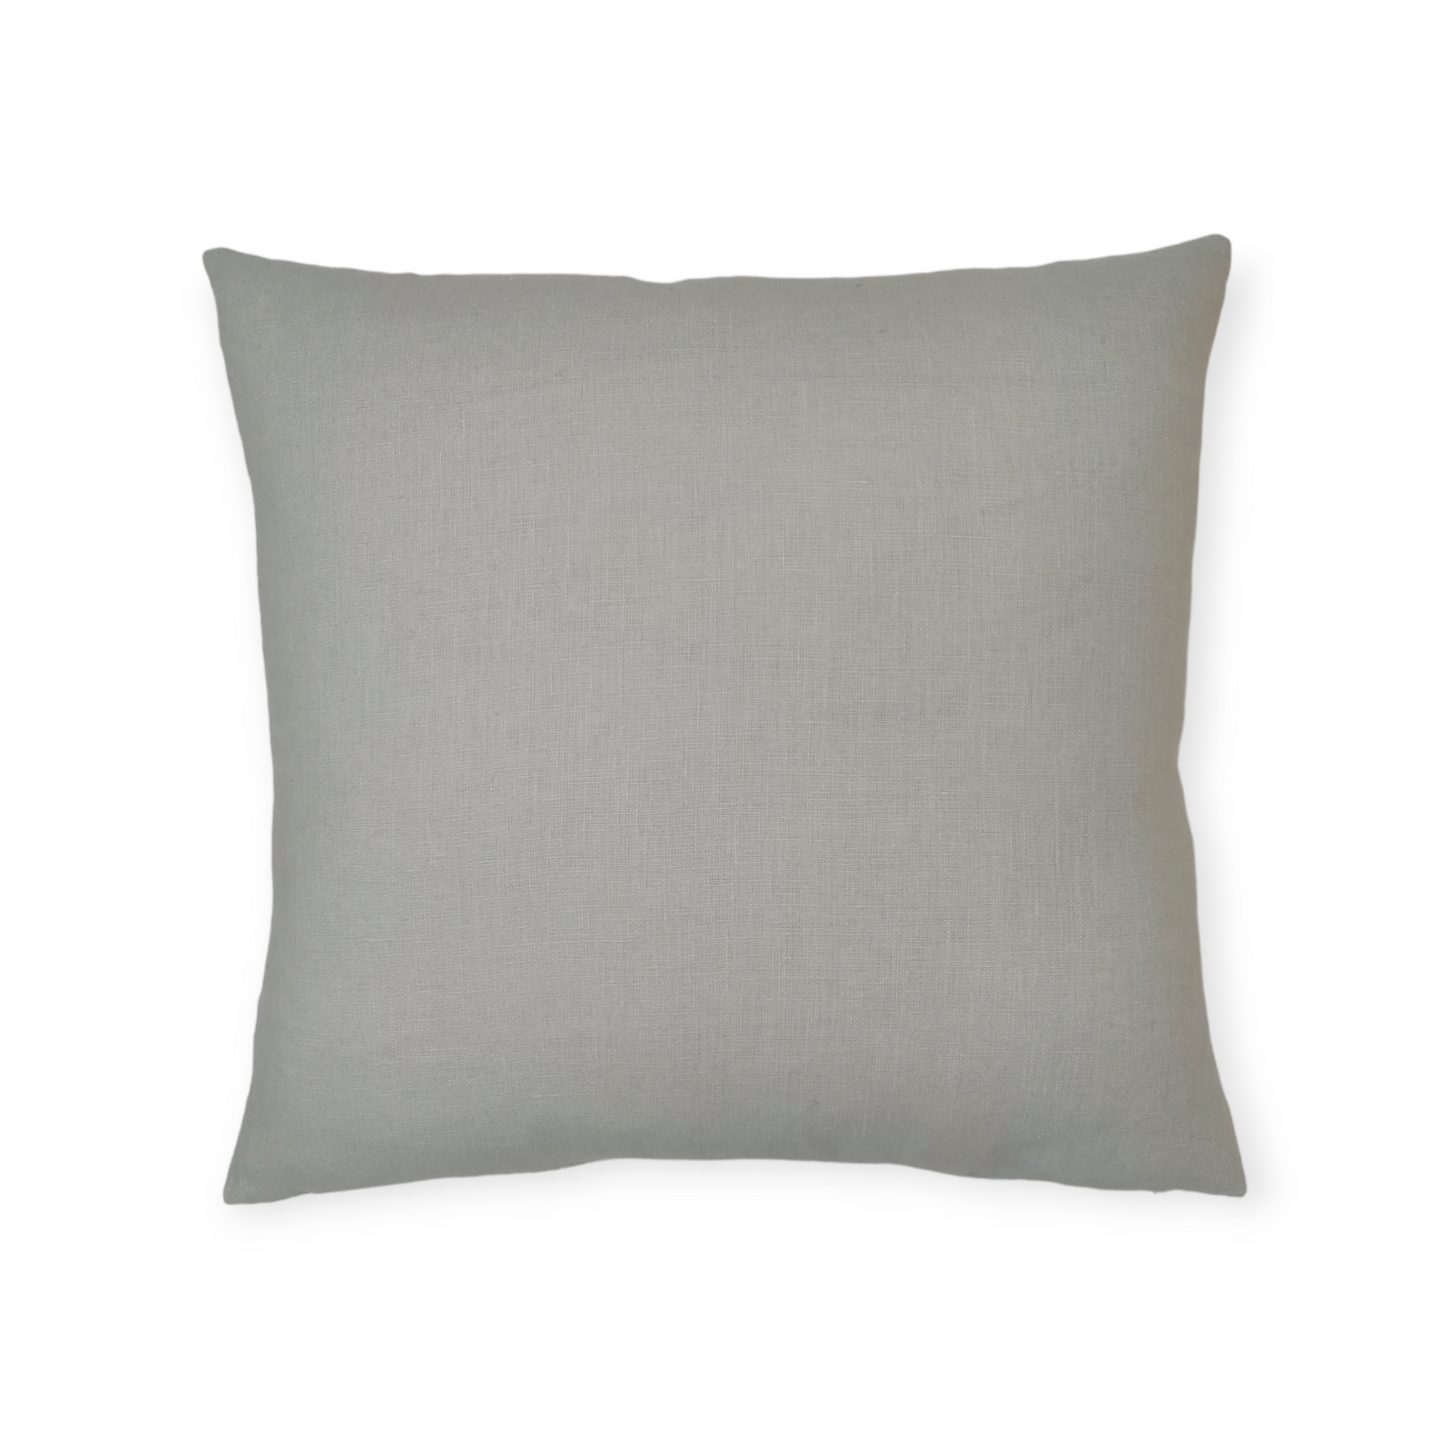 Pierre Frey Indhira Coquille Square Cushion